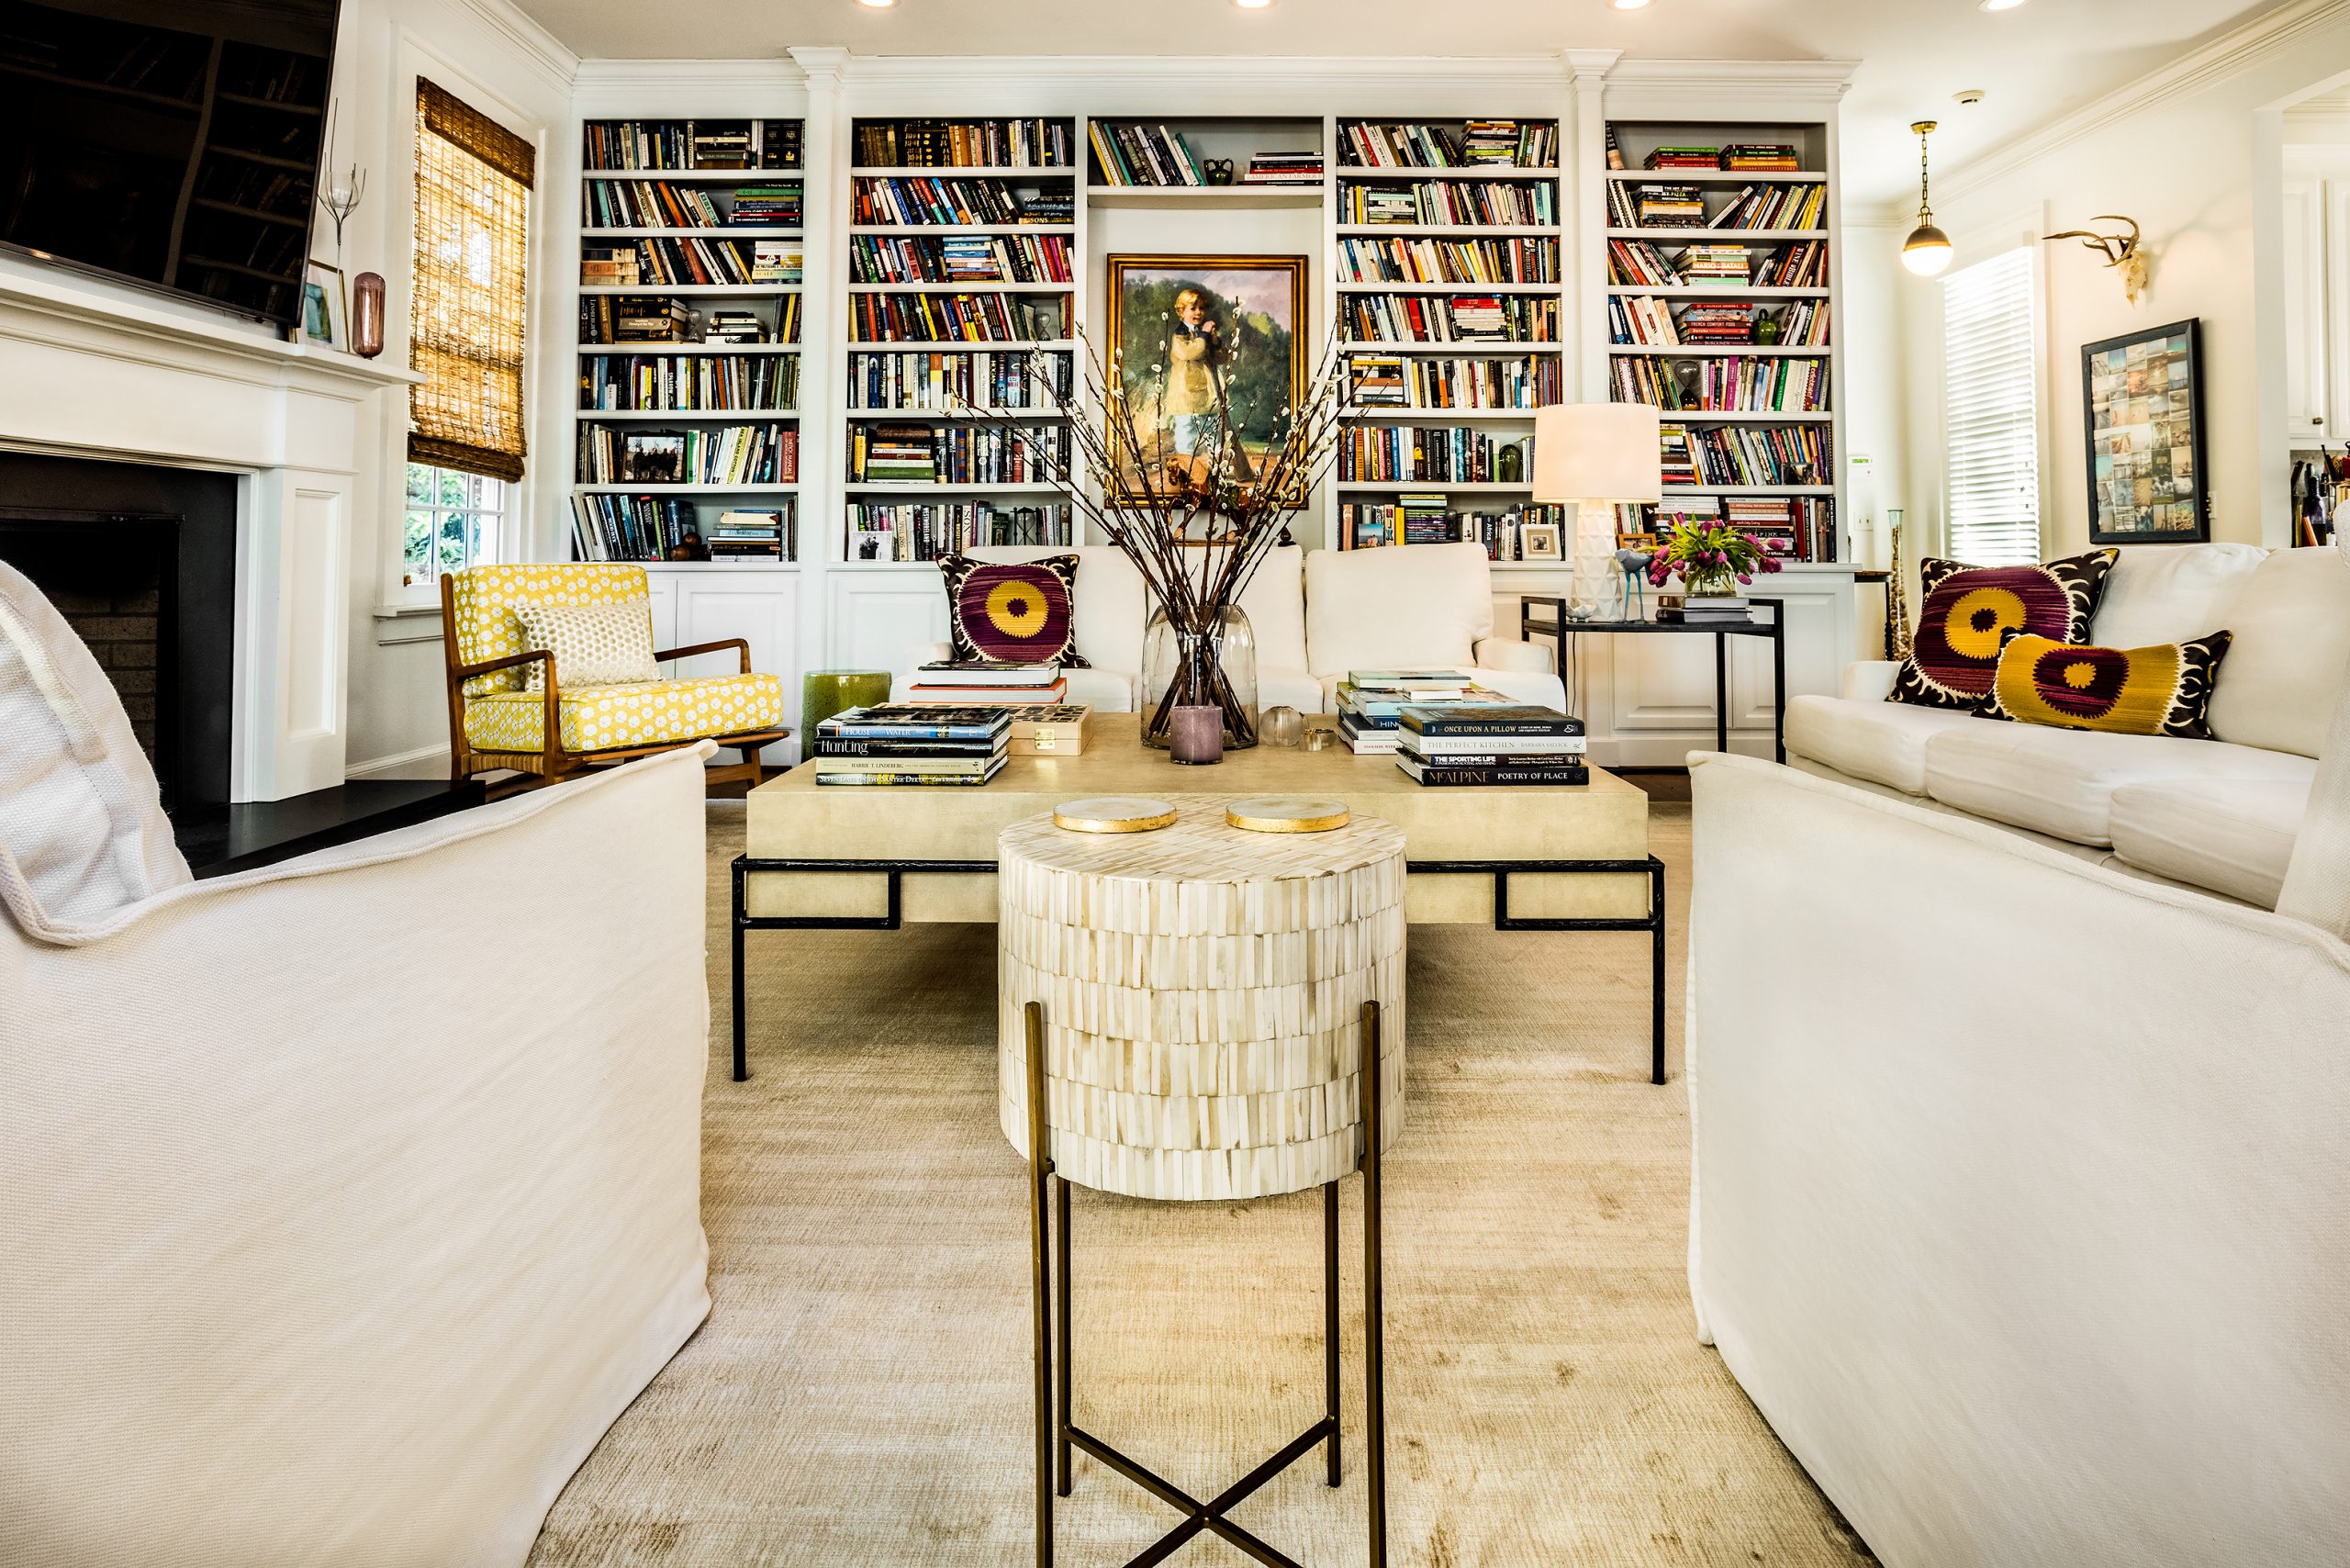 Karen’s aesthetic has evolved over the years, and she has lightened and brightened their home to accommodate gracious space for living and entertaining and their ever-growing and changing collection of artwork and books. Their kitchen was formerly adjacent to a double den with two rooms divided down the middle by a wall with a fireplace and built-in bookcases. It was renovated five years ago into a beautiful large, open space that is perfect for entertaining and family gatherings spilling onto the lovely terrace.